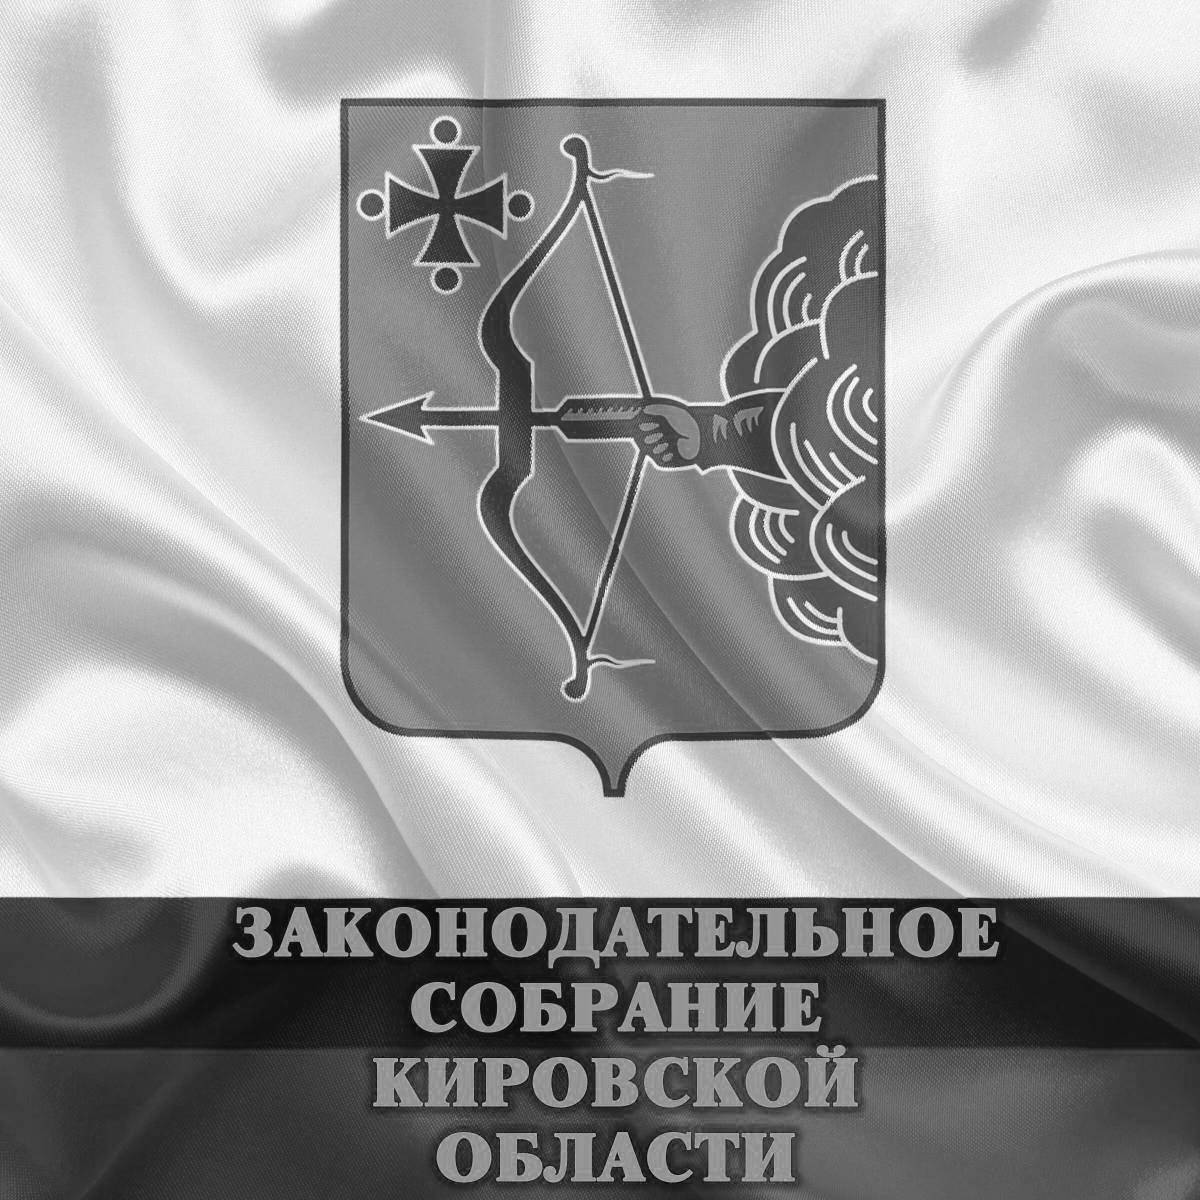 Royal coat of arms of the Kirov region